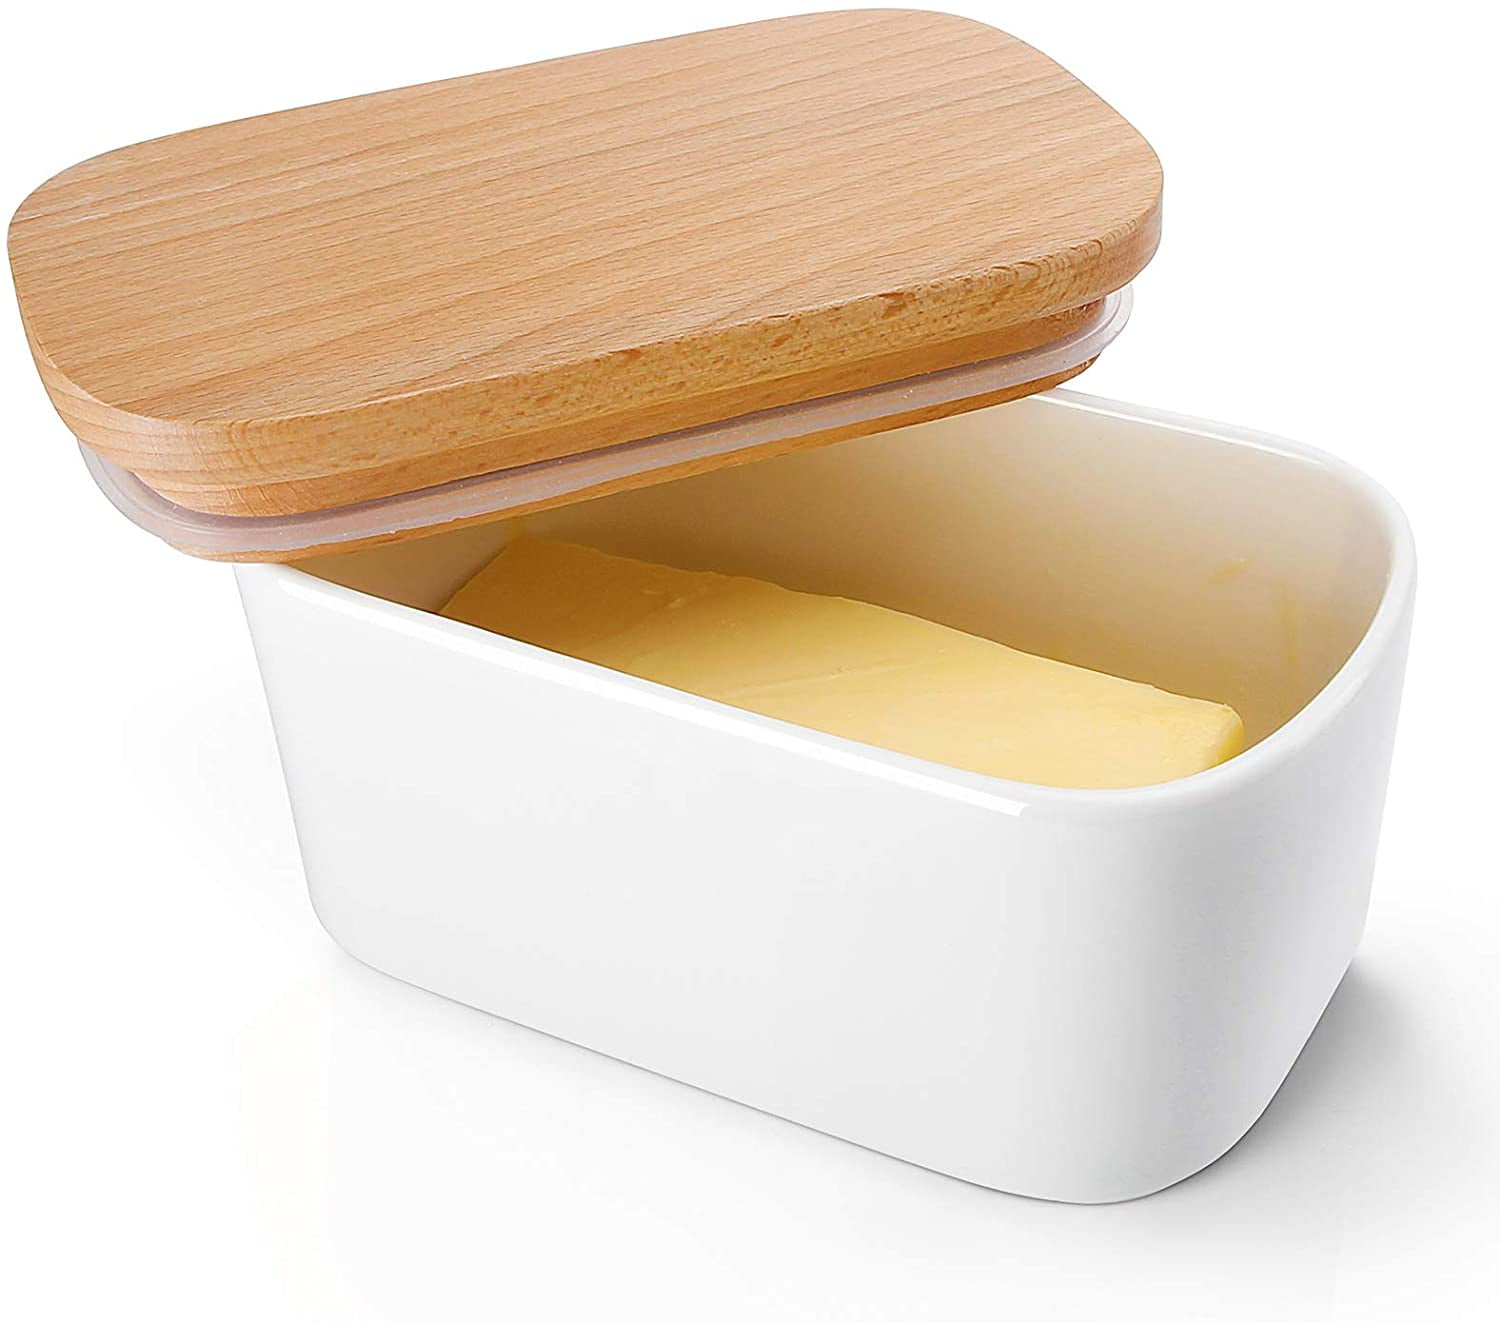 Butter Dish with Lid 250g Easy Clean Heat Resistant Material with Porcelain Keeper and Airtight Bamboo Cover for Countertop Refrigerator Kitchen Storage Box 